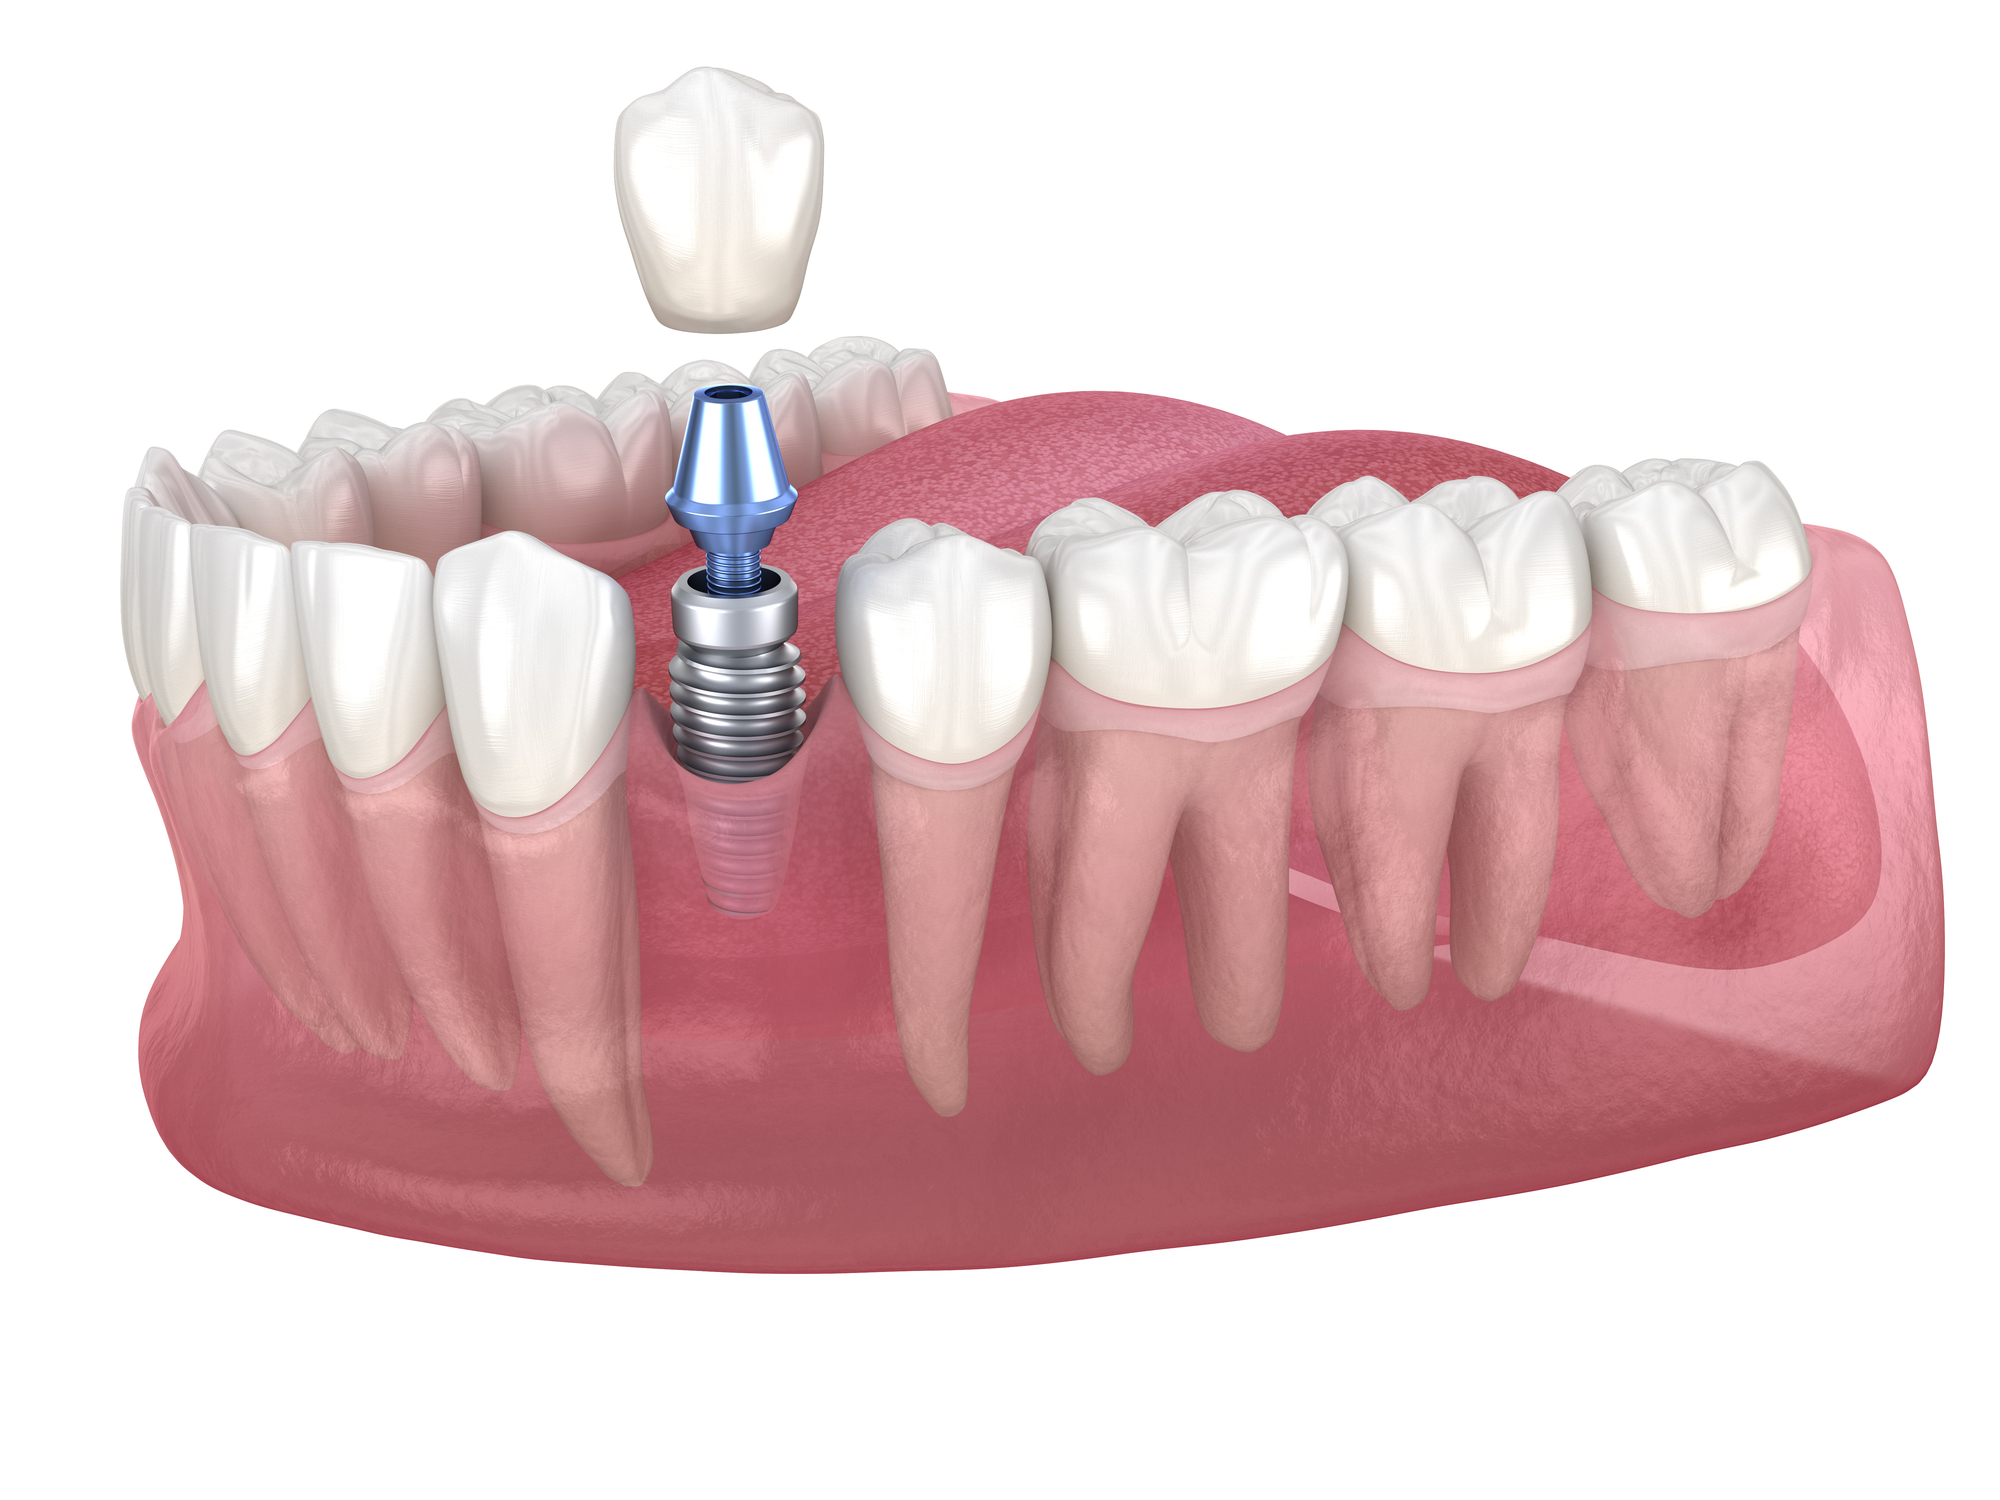 Premolar tooth recovery with implant. Medically accurate 3D illustration of human teeth and dentures concept